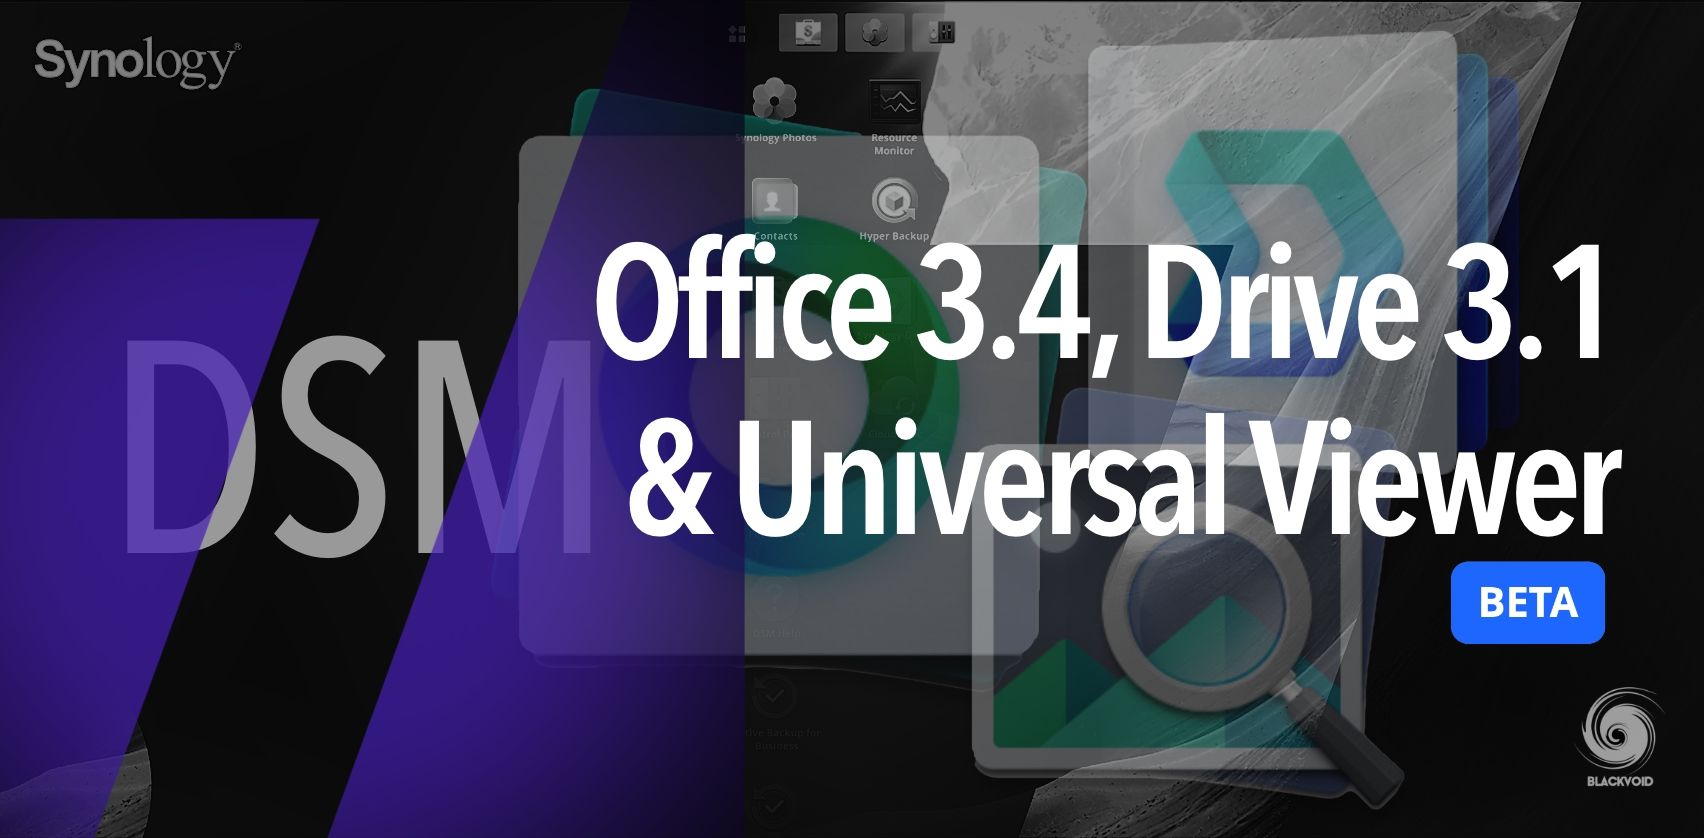 Synology Office 3.4, Drive 3.1 & Universal Viewer